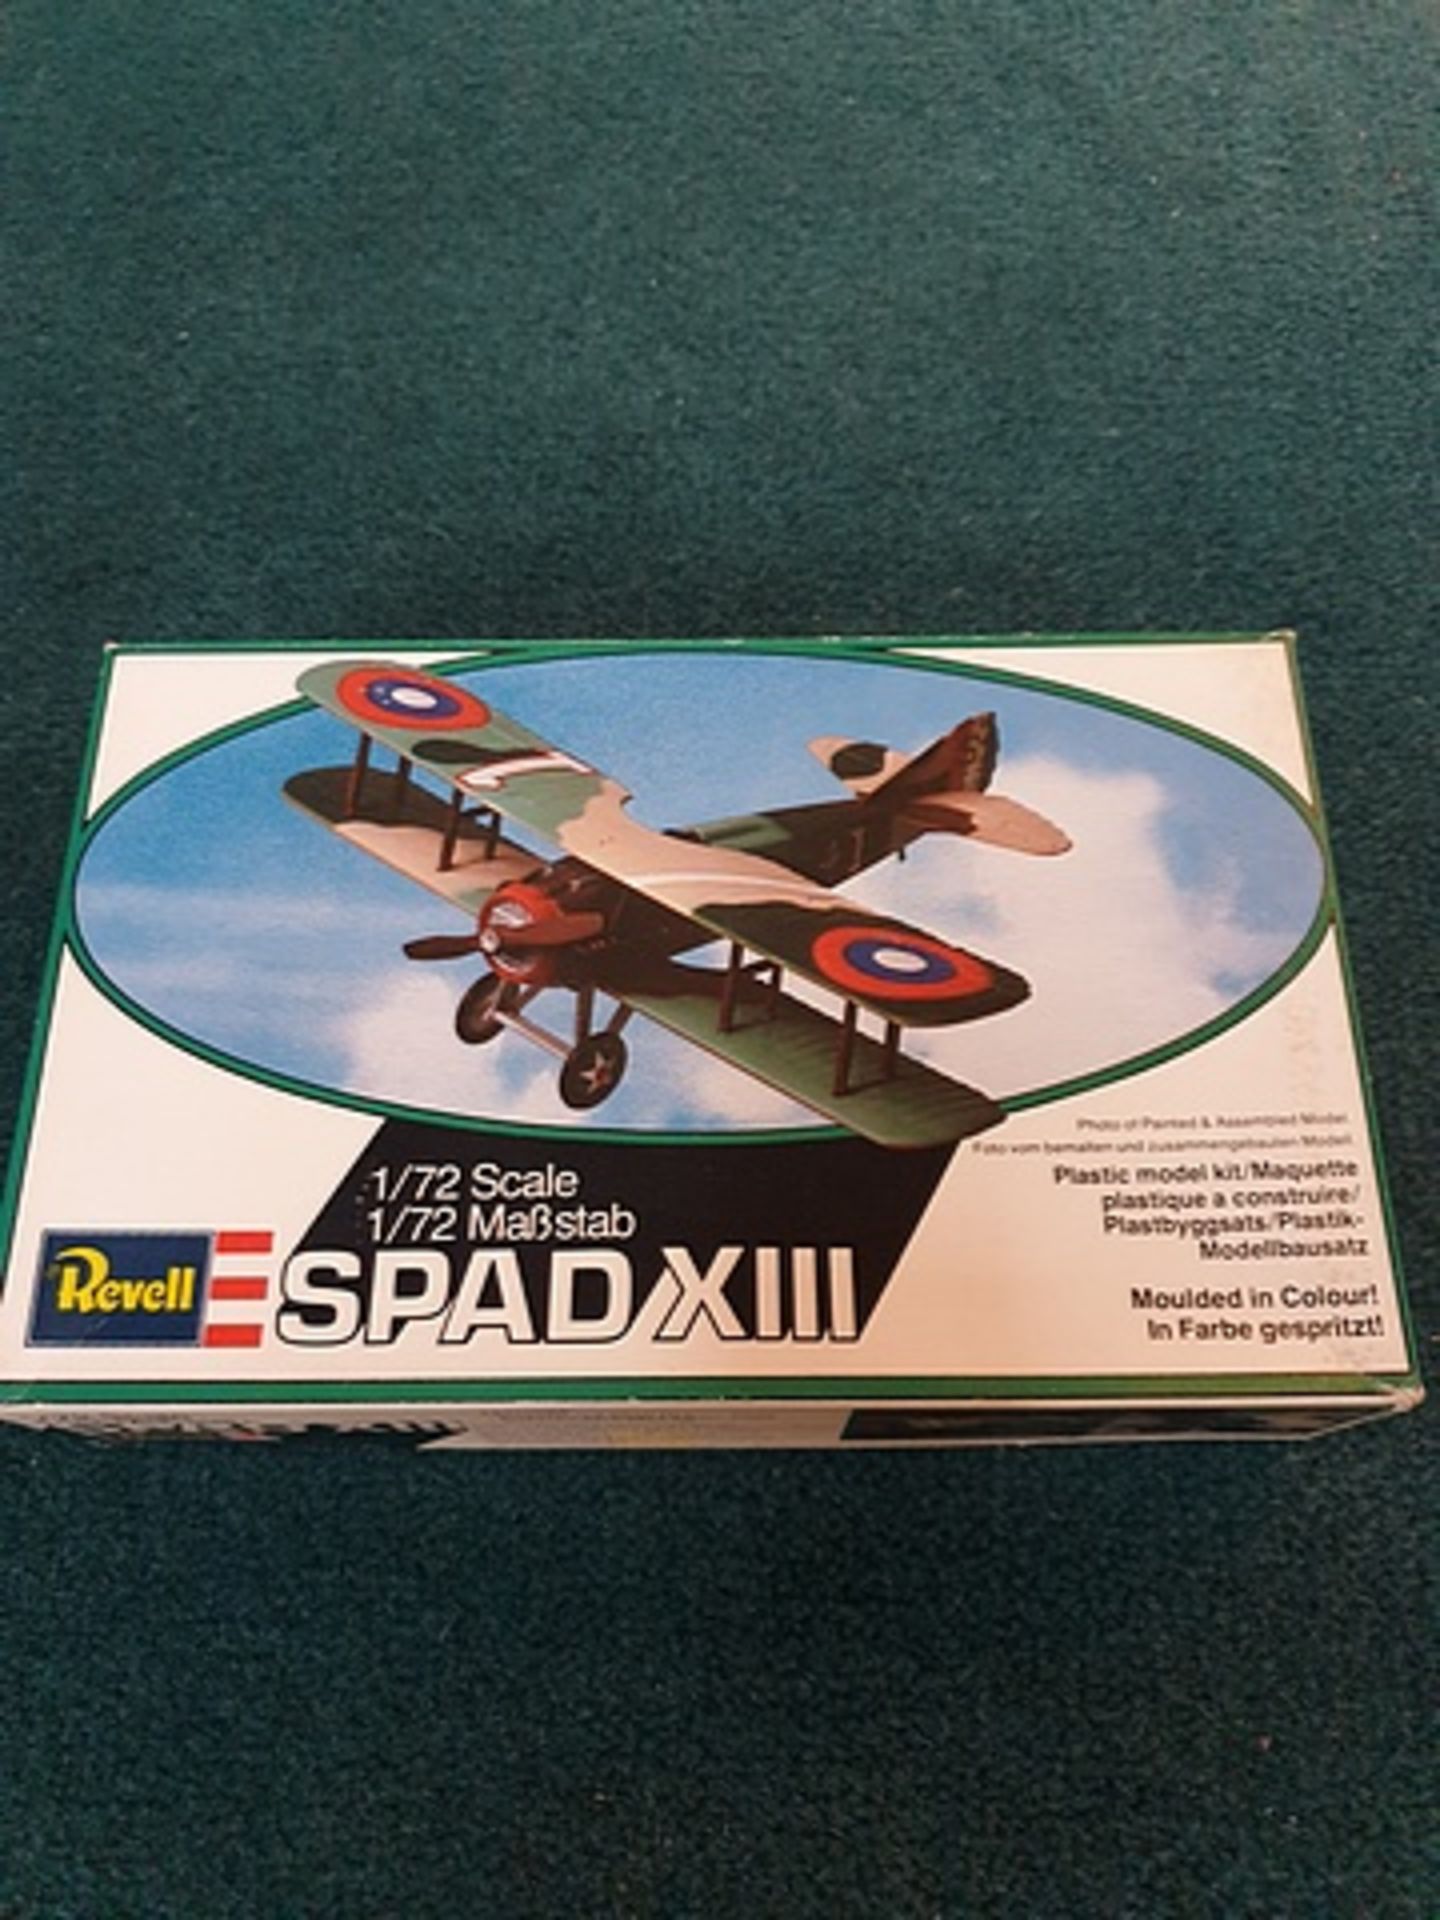 Revell scale 1/72 model 4109 Spad XIII model airplane kit released 1980 complete in box